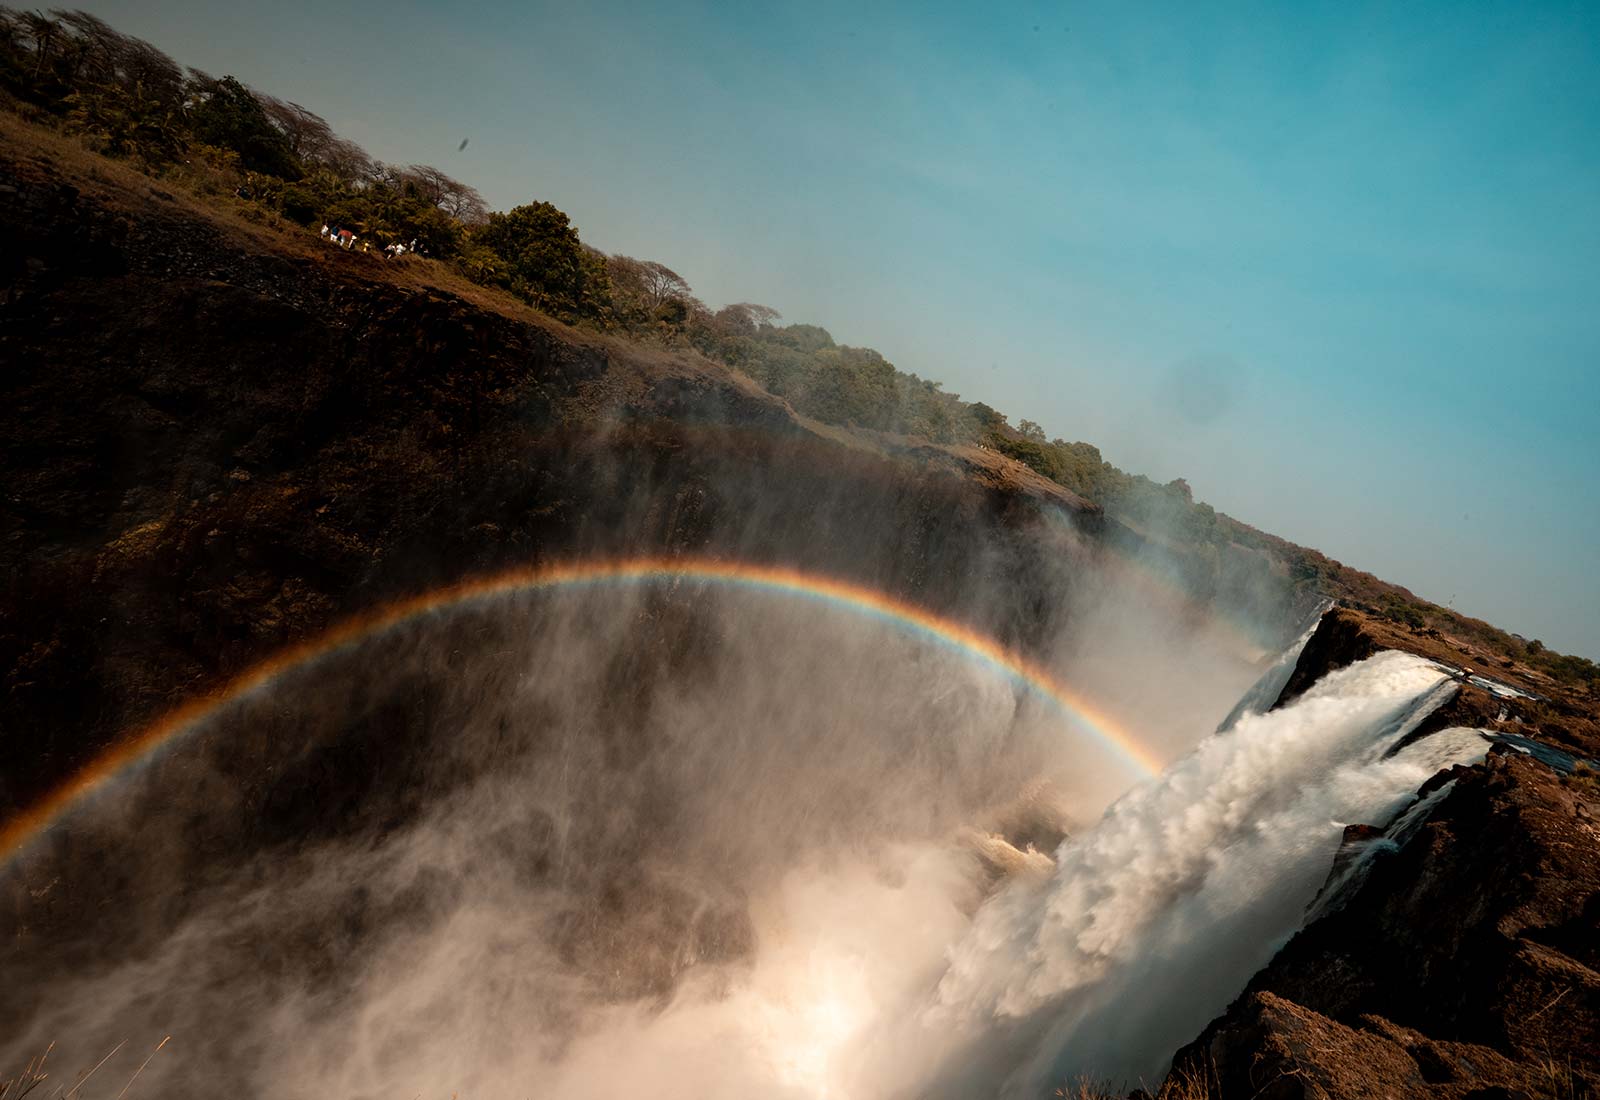 Rainbow at Victoria Falls in Zambia, Africa. The devil's pool